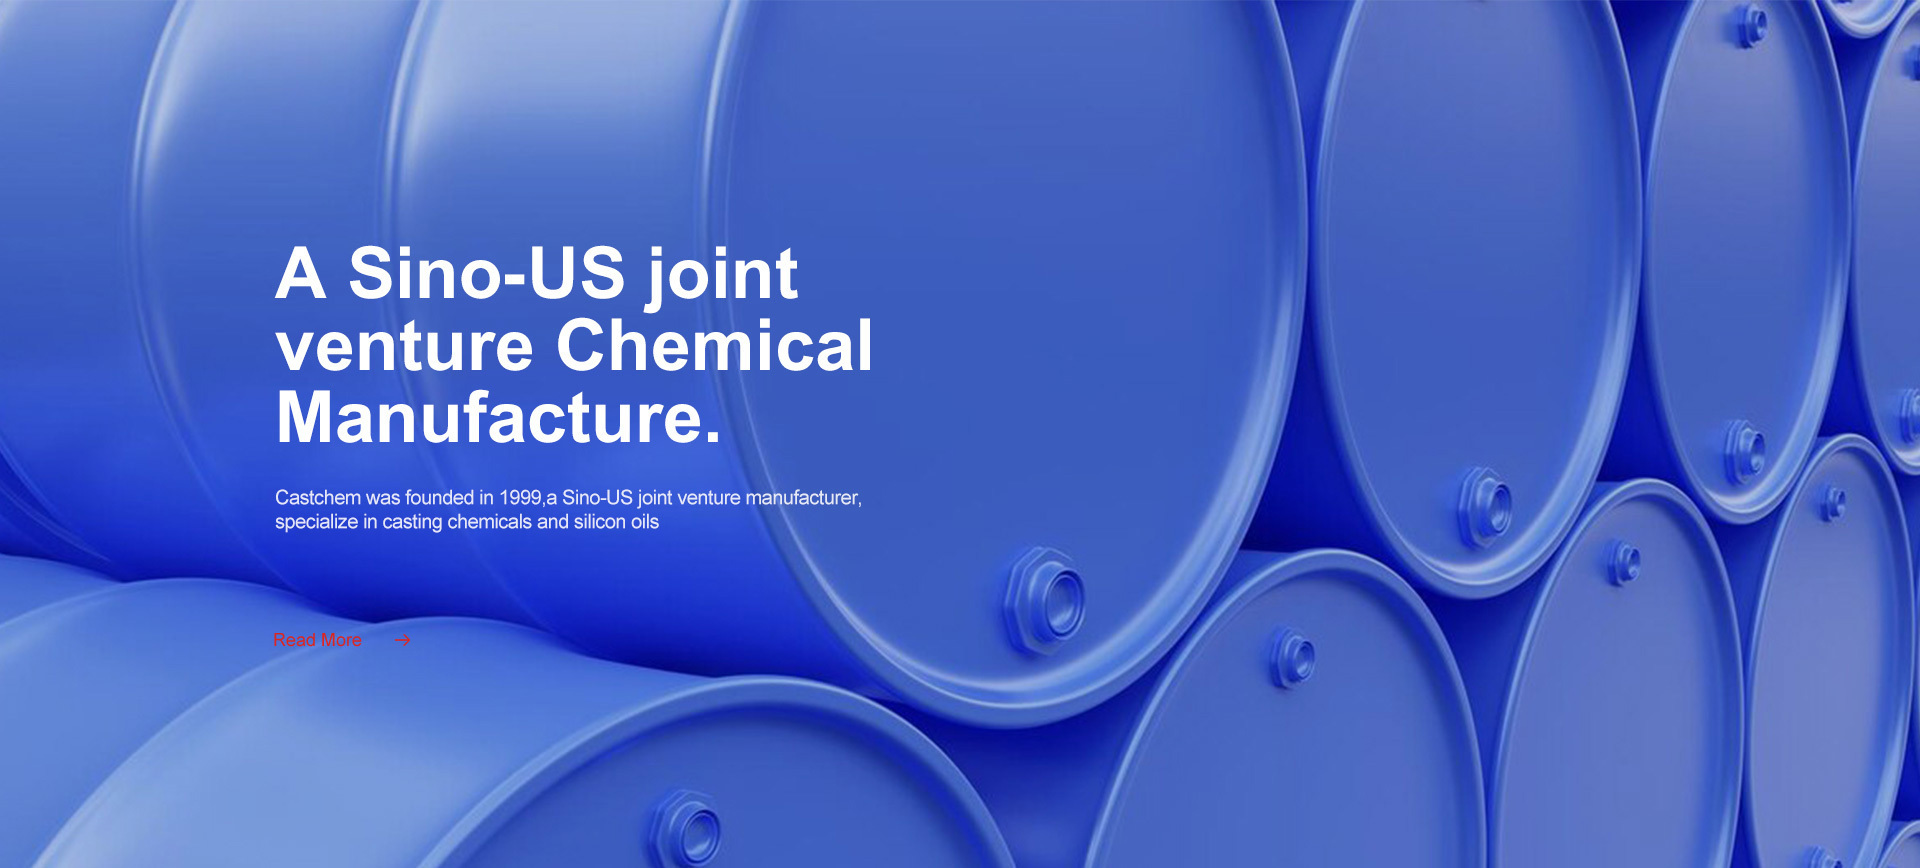 A Sino-US joint venture Chemical Manufacture.